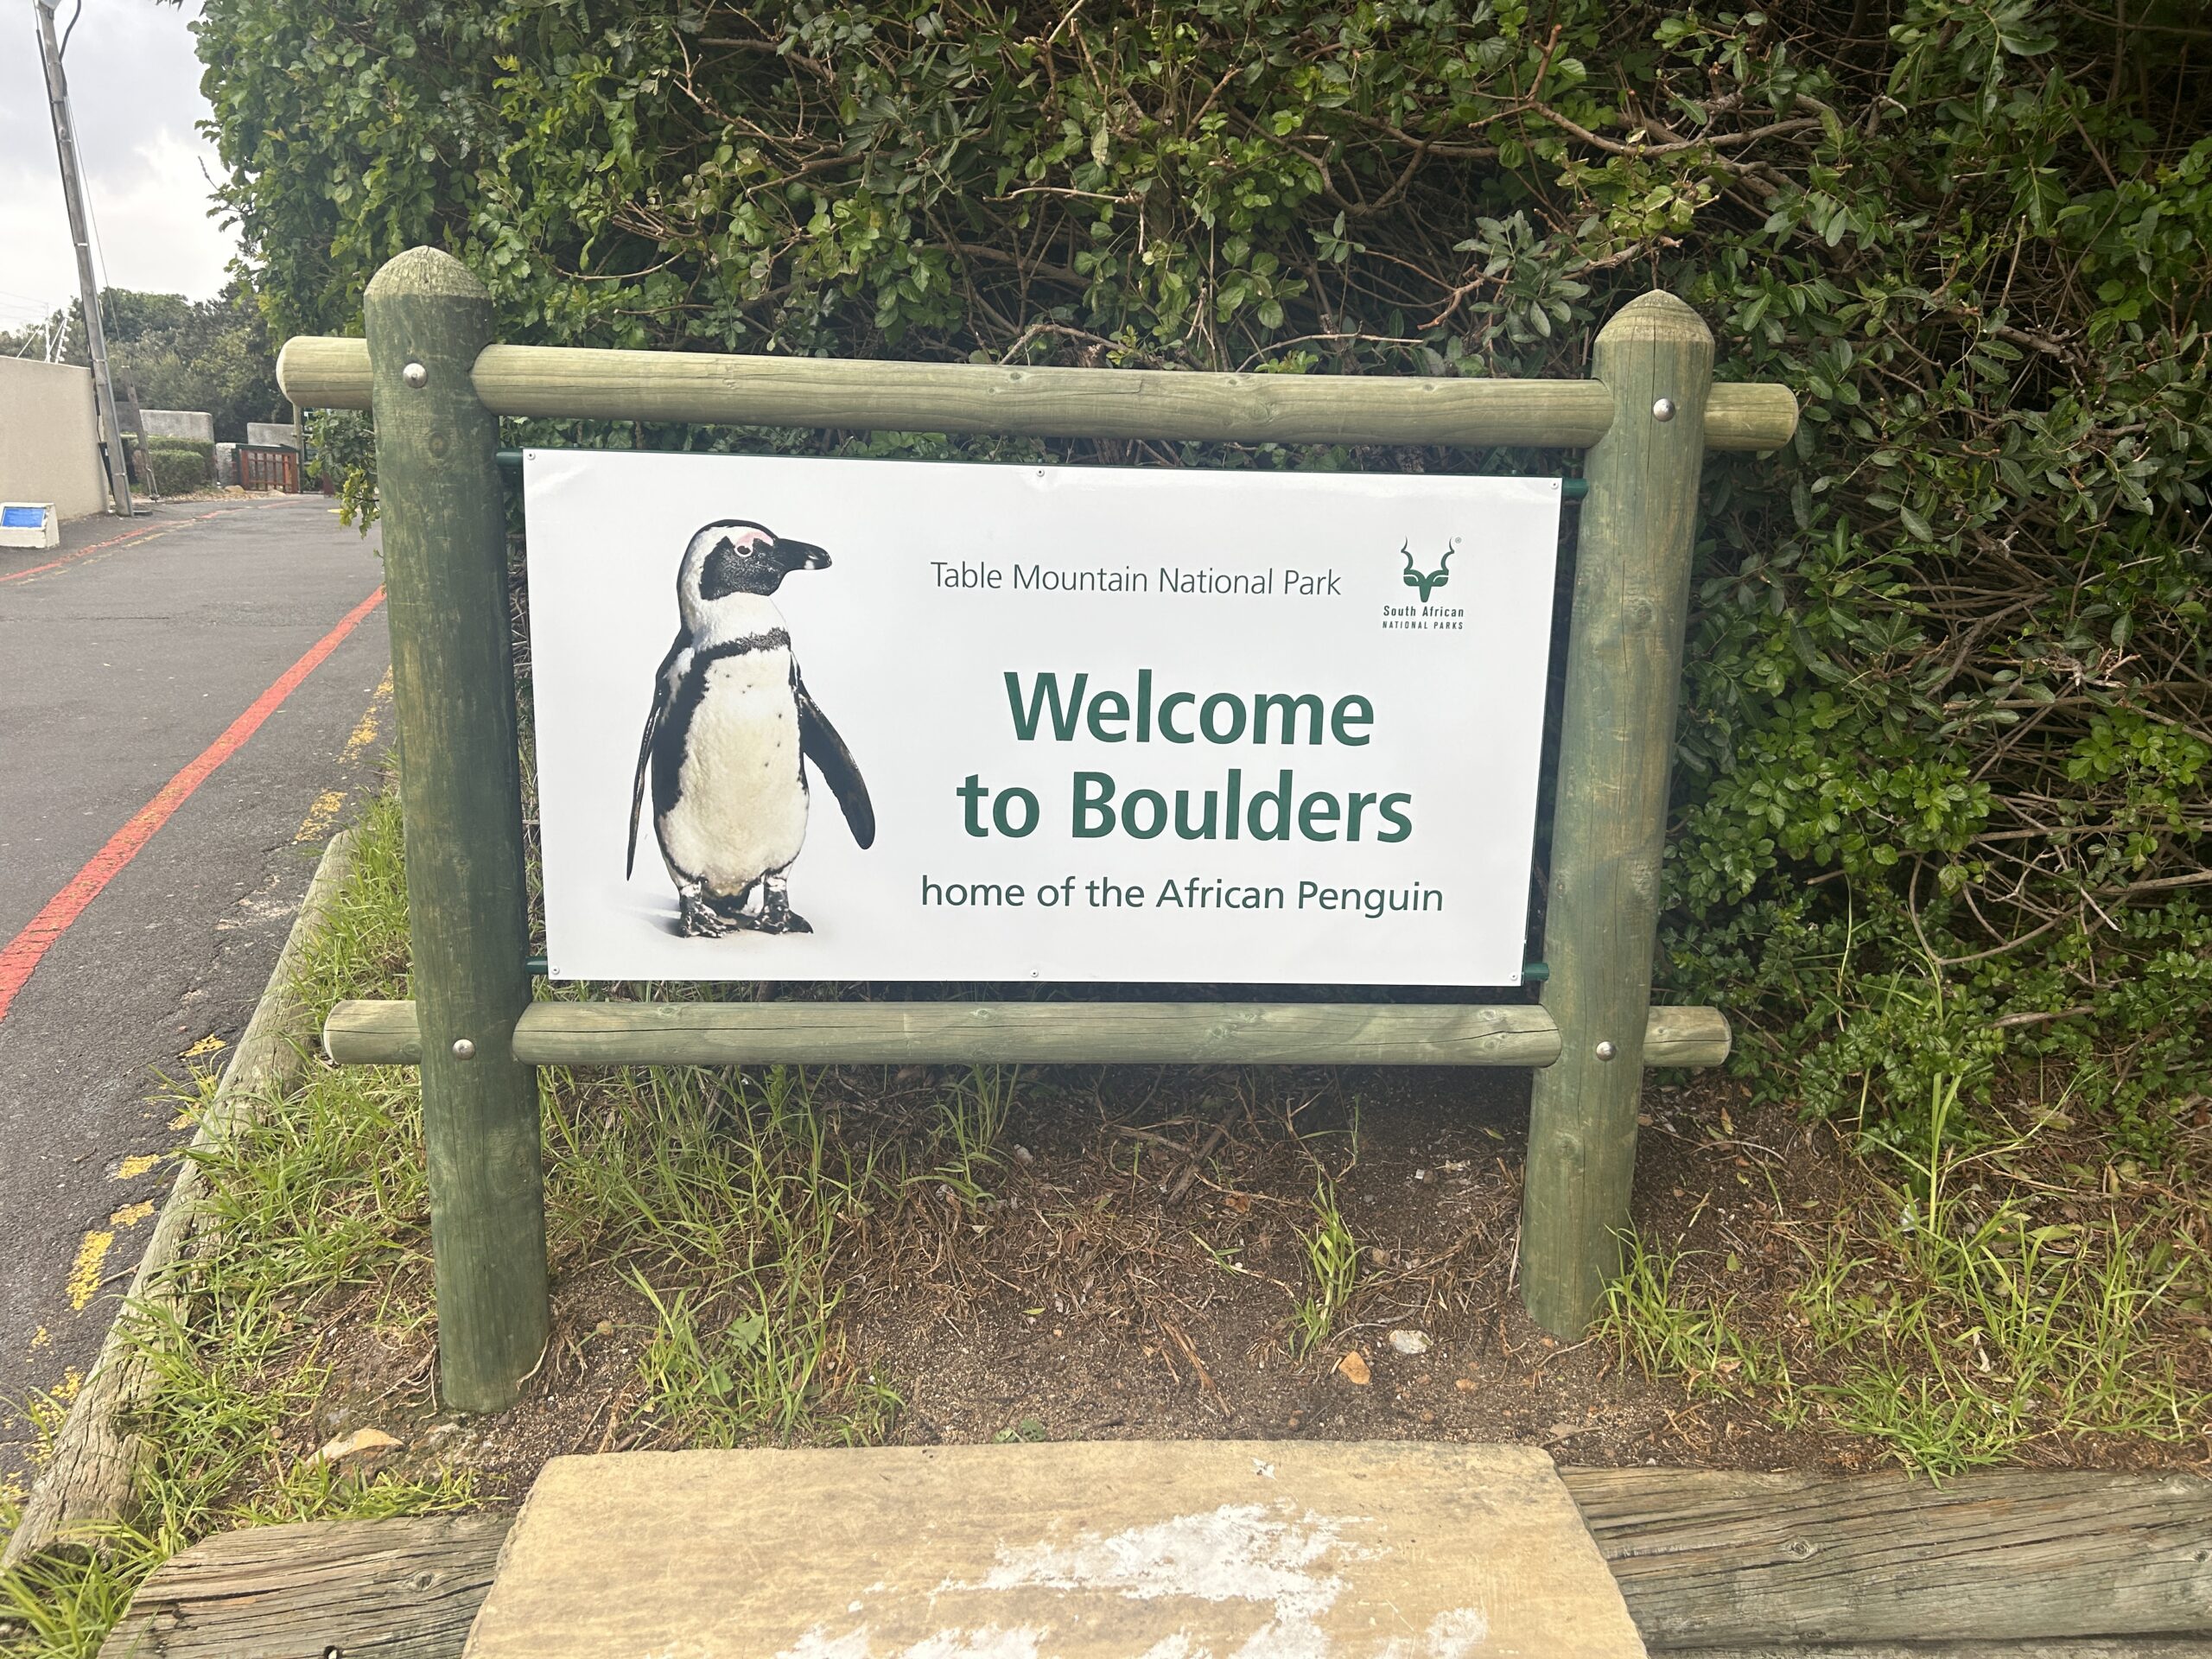 Sign says: Table Mountain National Park; Welcome to Boulders - home of the African Penguin 